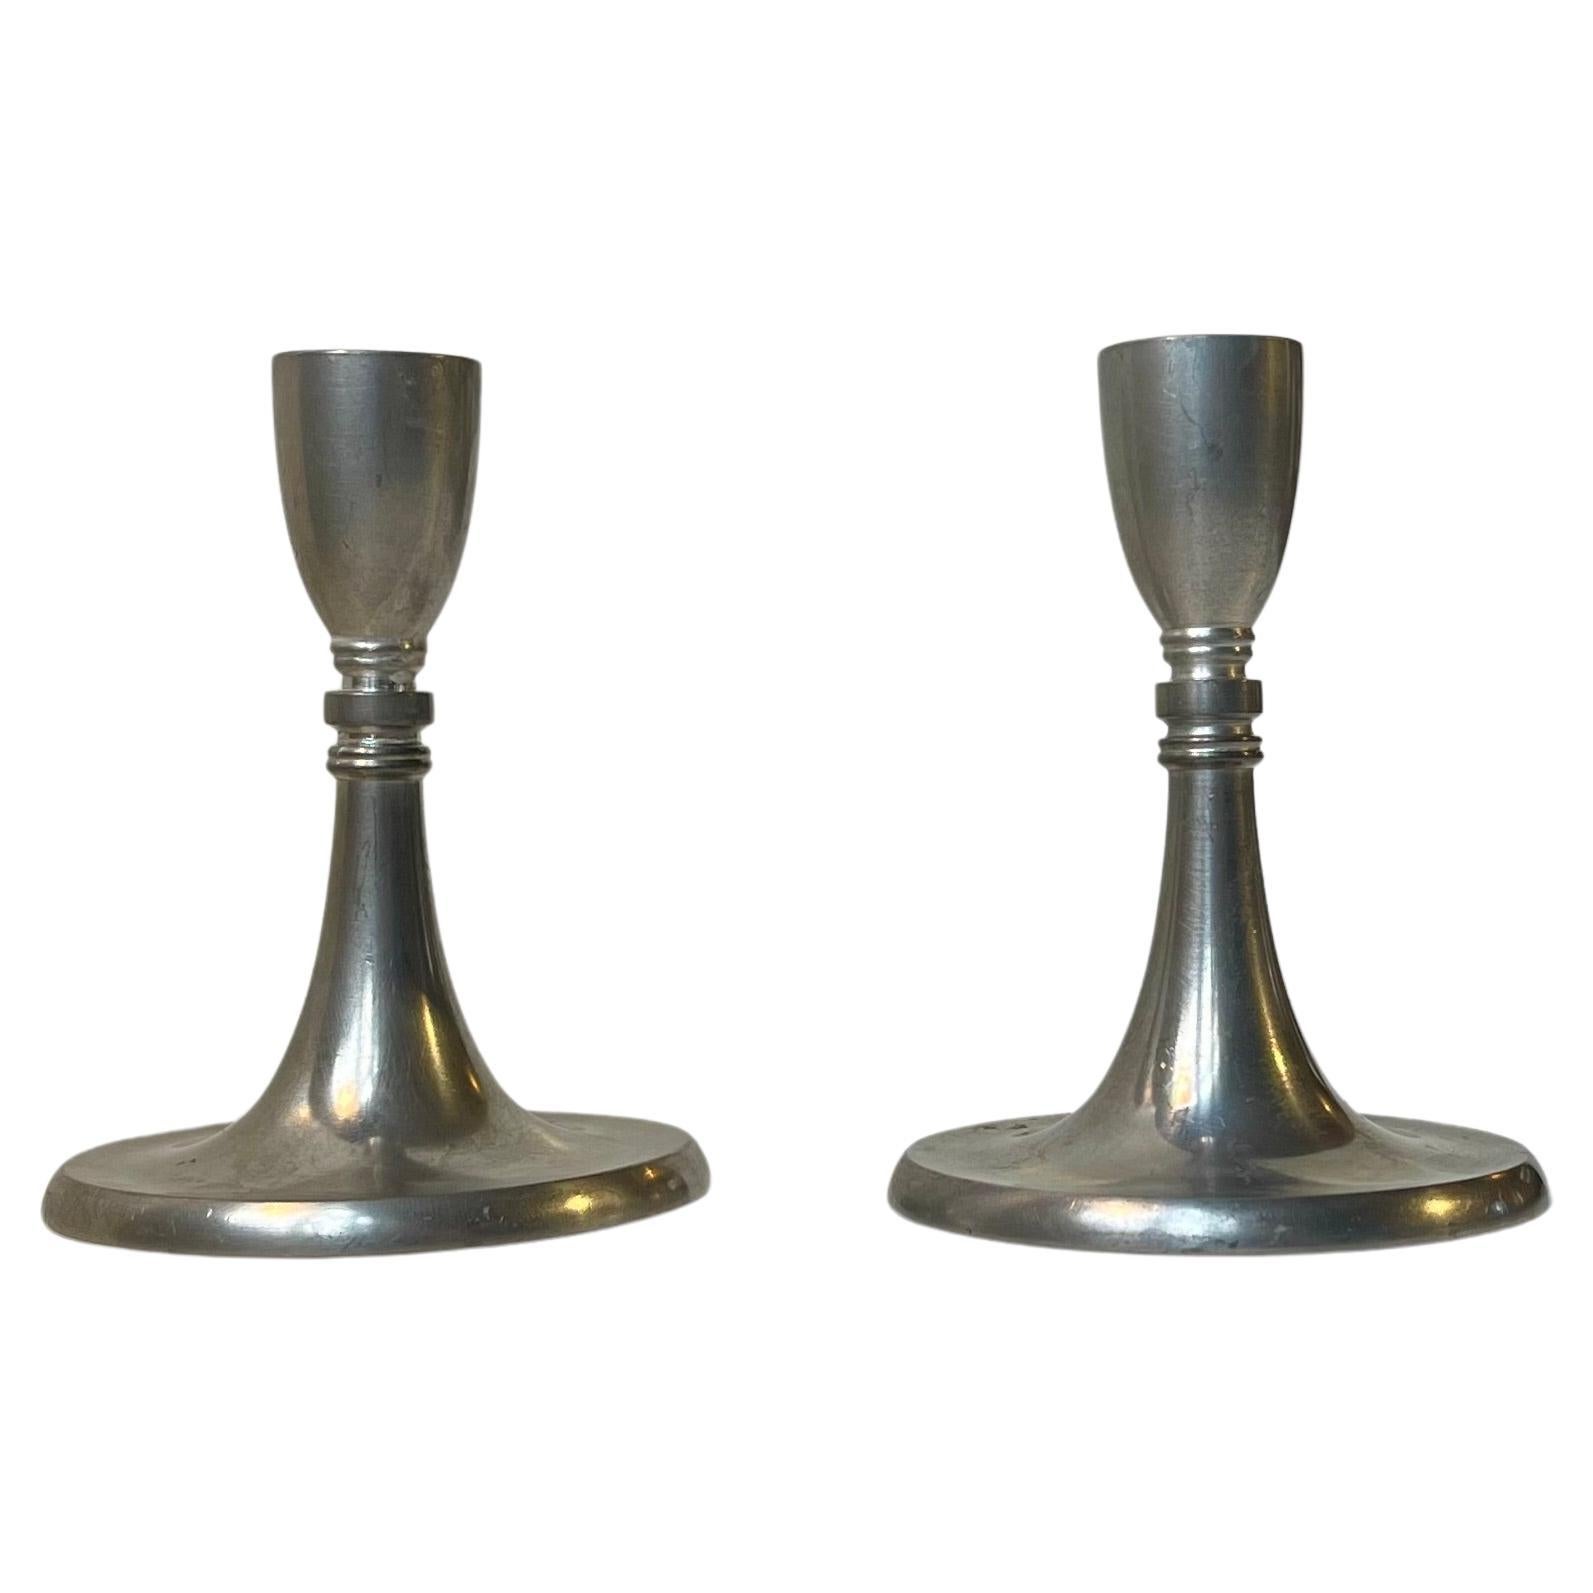 Art Deco Pewter Candlesticks by Just Andersen, 1940s